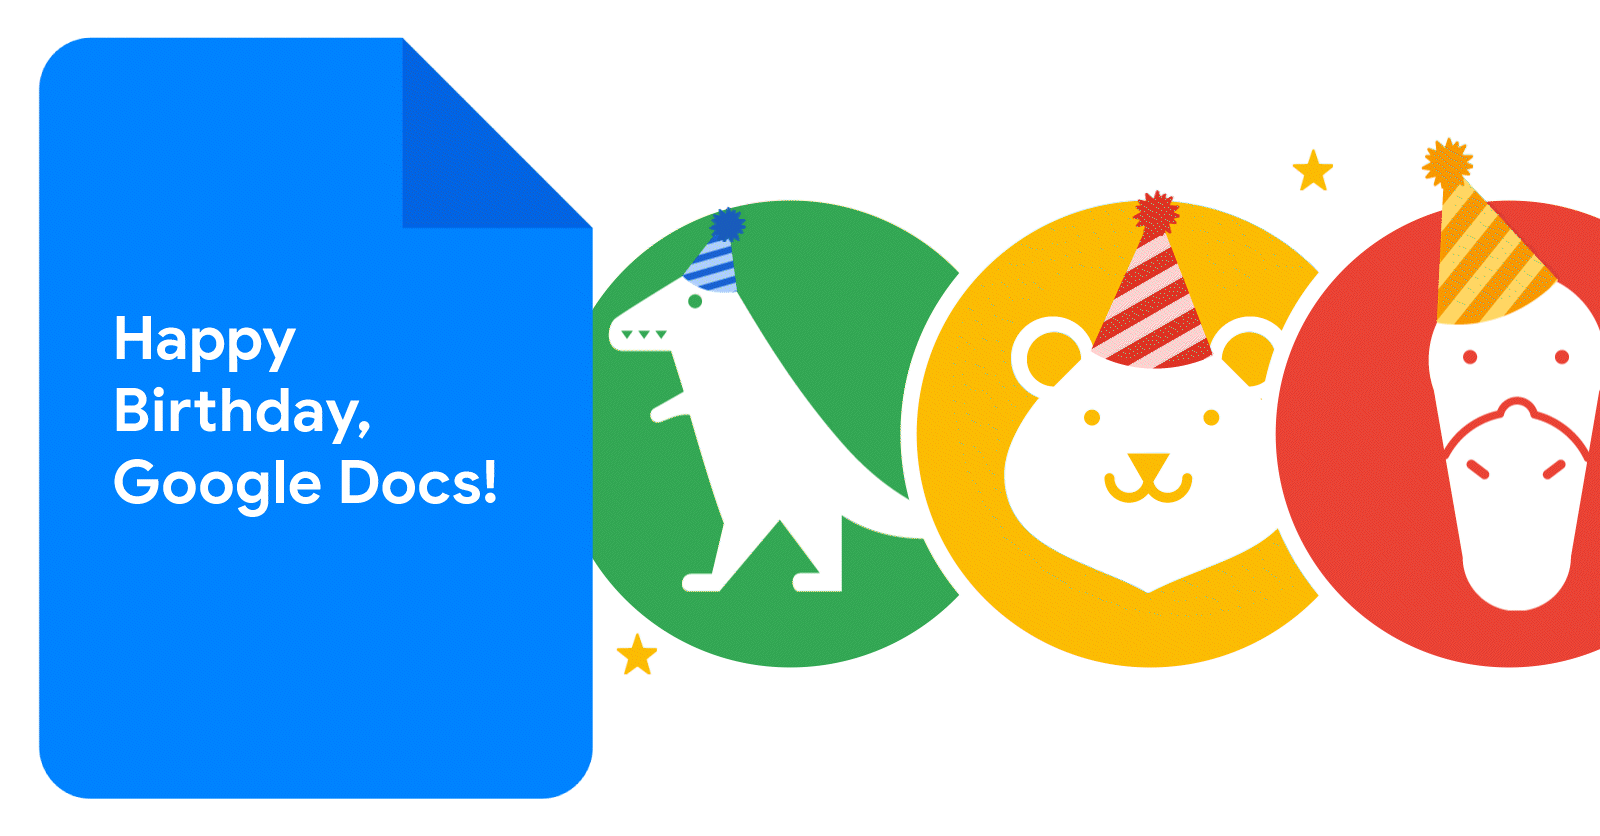 Animated GIF of three "anonymous animals" icons next to an icon of a Google Docs. The Google Doc icon says "Happy birthday, Google Docs!". Animated confetti and party hats surround the image.